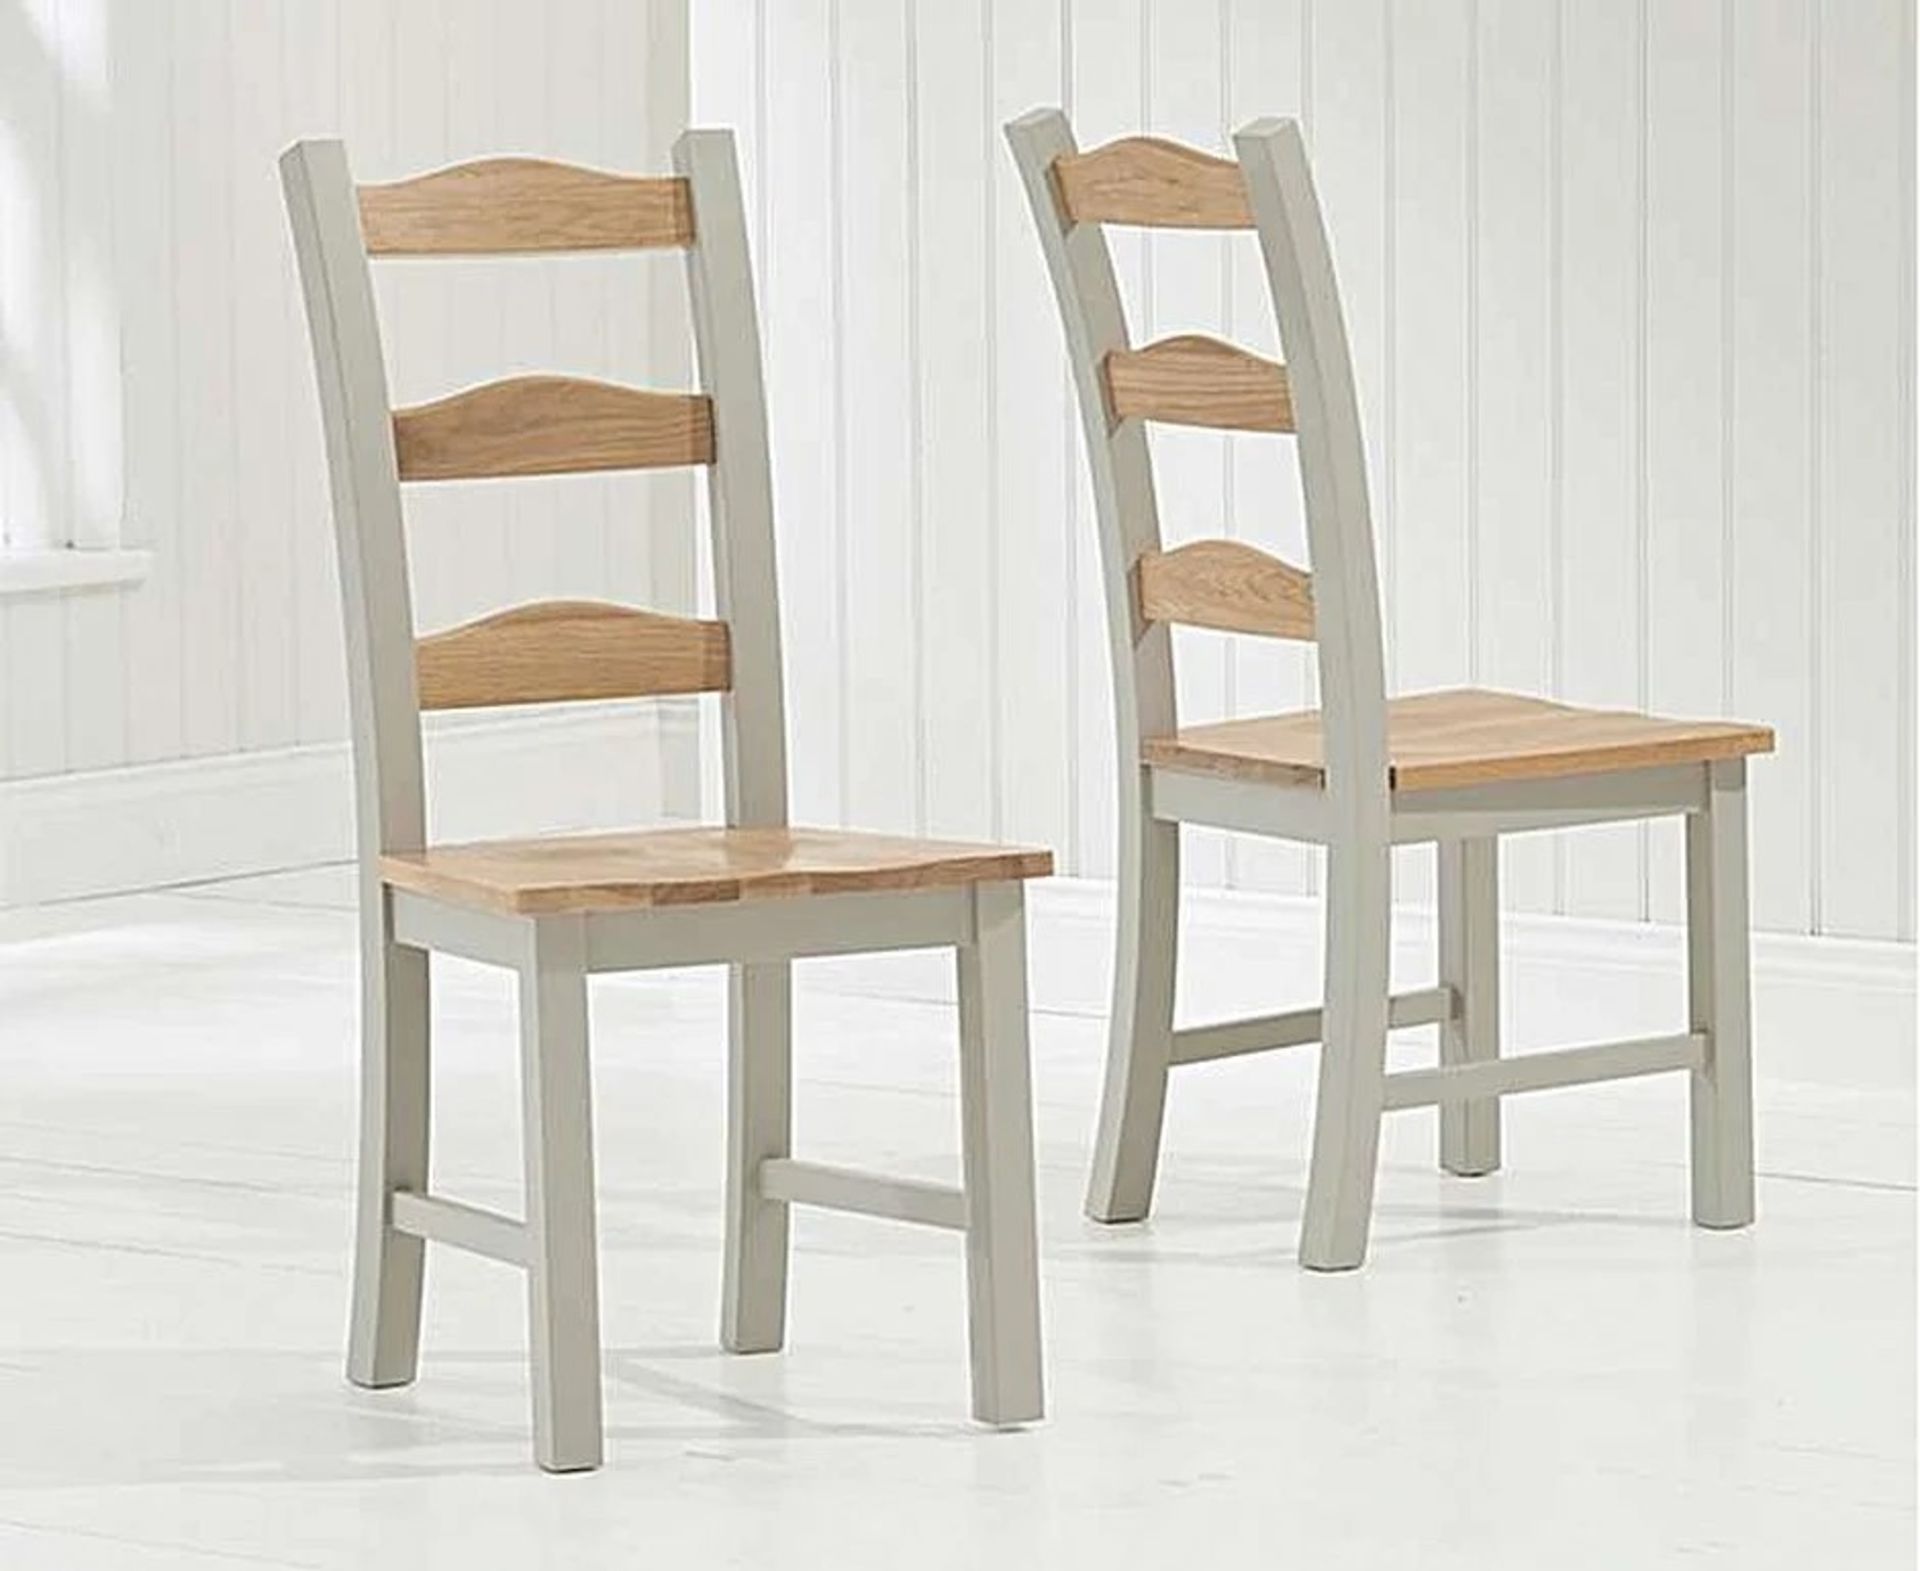 A set of 5 x Somerset Oak and Grey Dining Chairs The Somerset collection is a charming example of